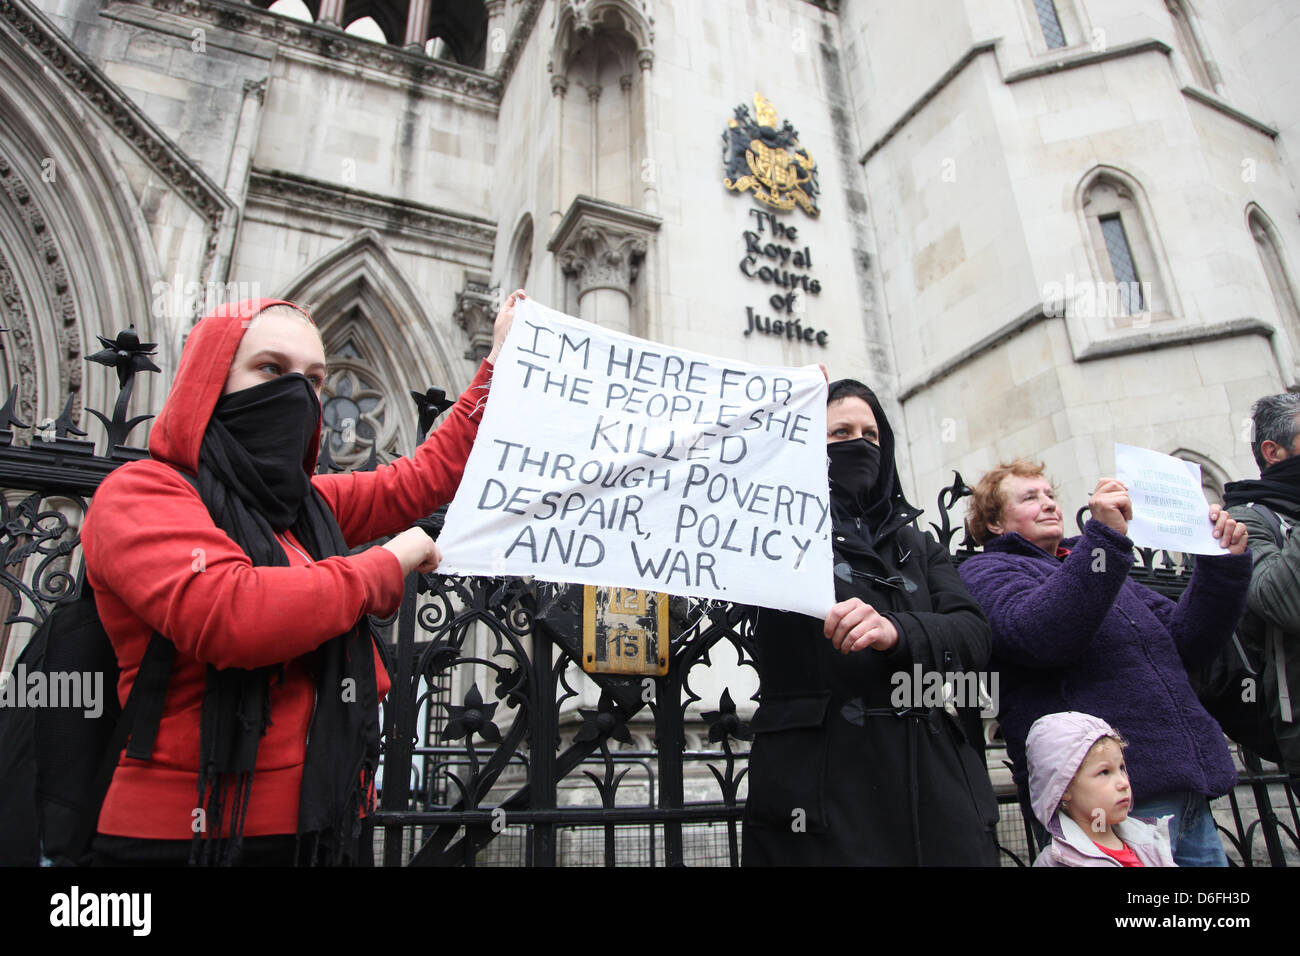 London, UK. 17th April 2013. The Funeral of Baroness Margaret Thatcher. Anti-Thatcher protesters outside the Royal Courts of Justice. The Funeral service takes place in St. Paul's Cathedral, London. Pic: Paul Marriott Photography/Alamy Live News Stock Photo